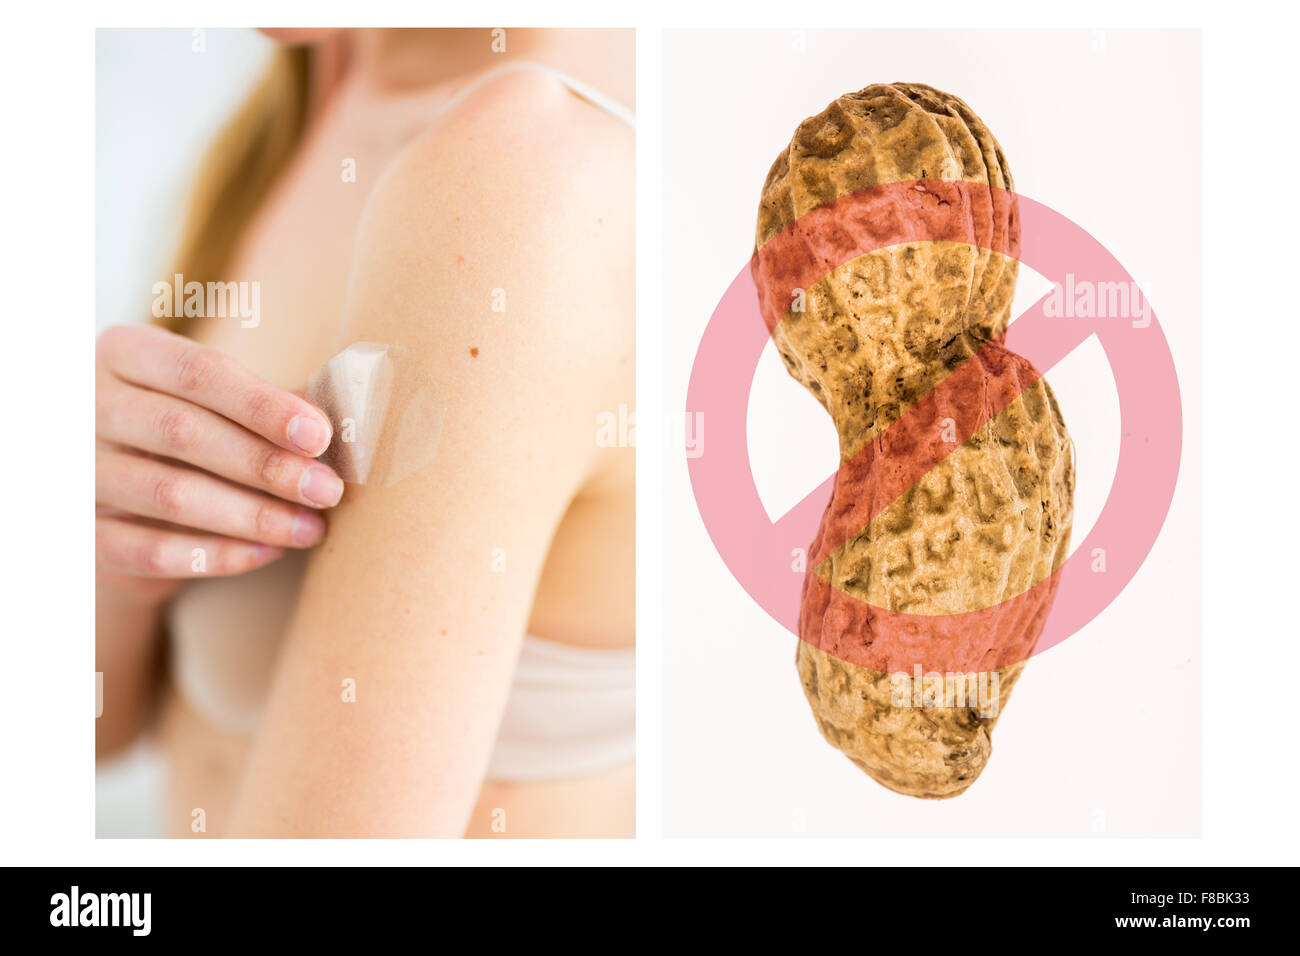 Composite on treatment against allergies to peanuts per patch. Stock Photo